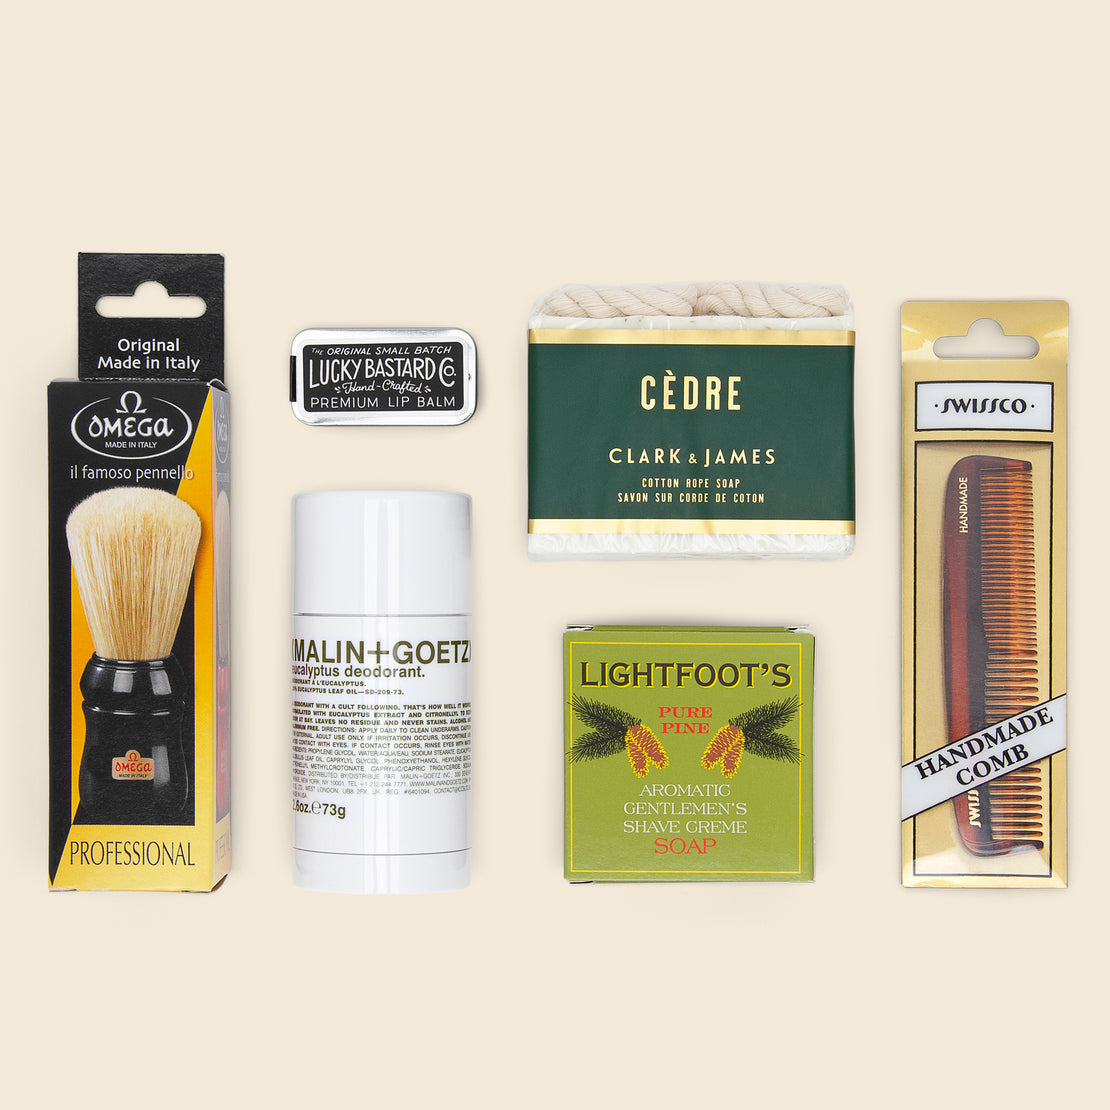 The Gift of Good Grooming Stocking - STAG - STAG Provisions - Gift - Miscellaneous